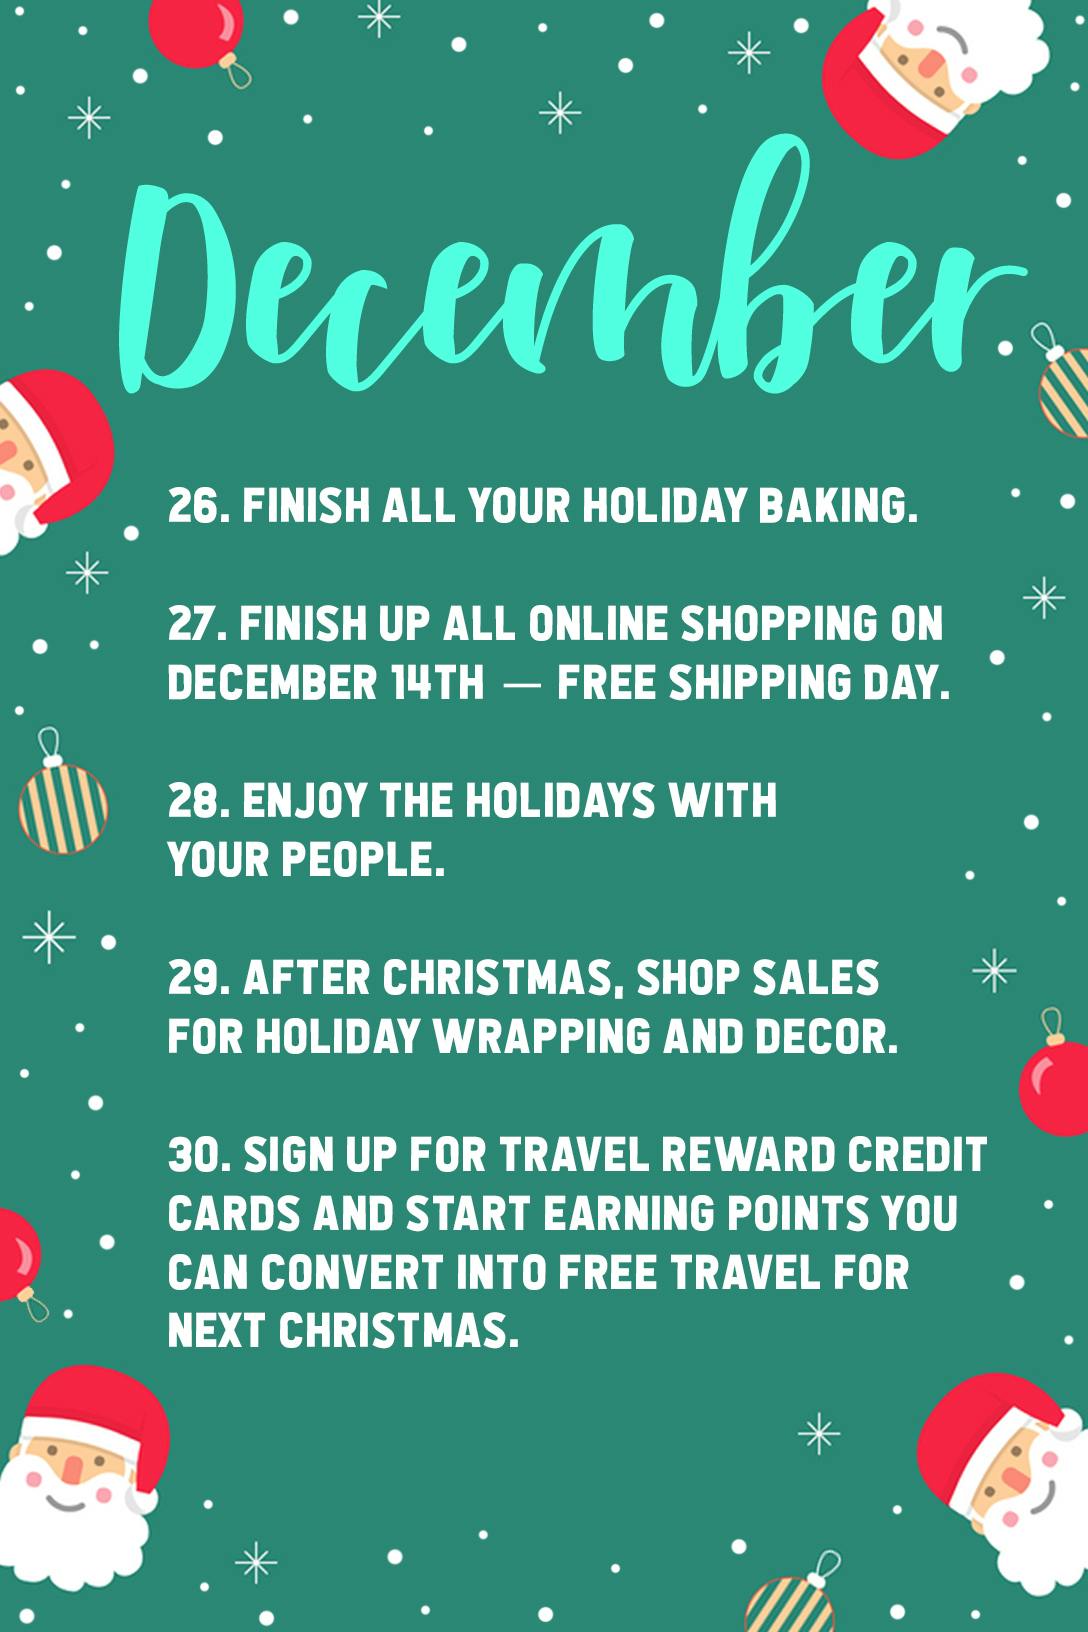 Graphic with a list of things to do to prepare for Christmas in the month of December.